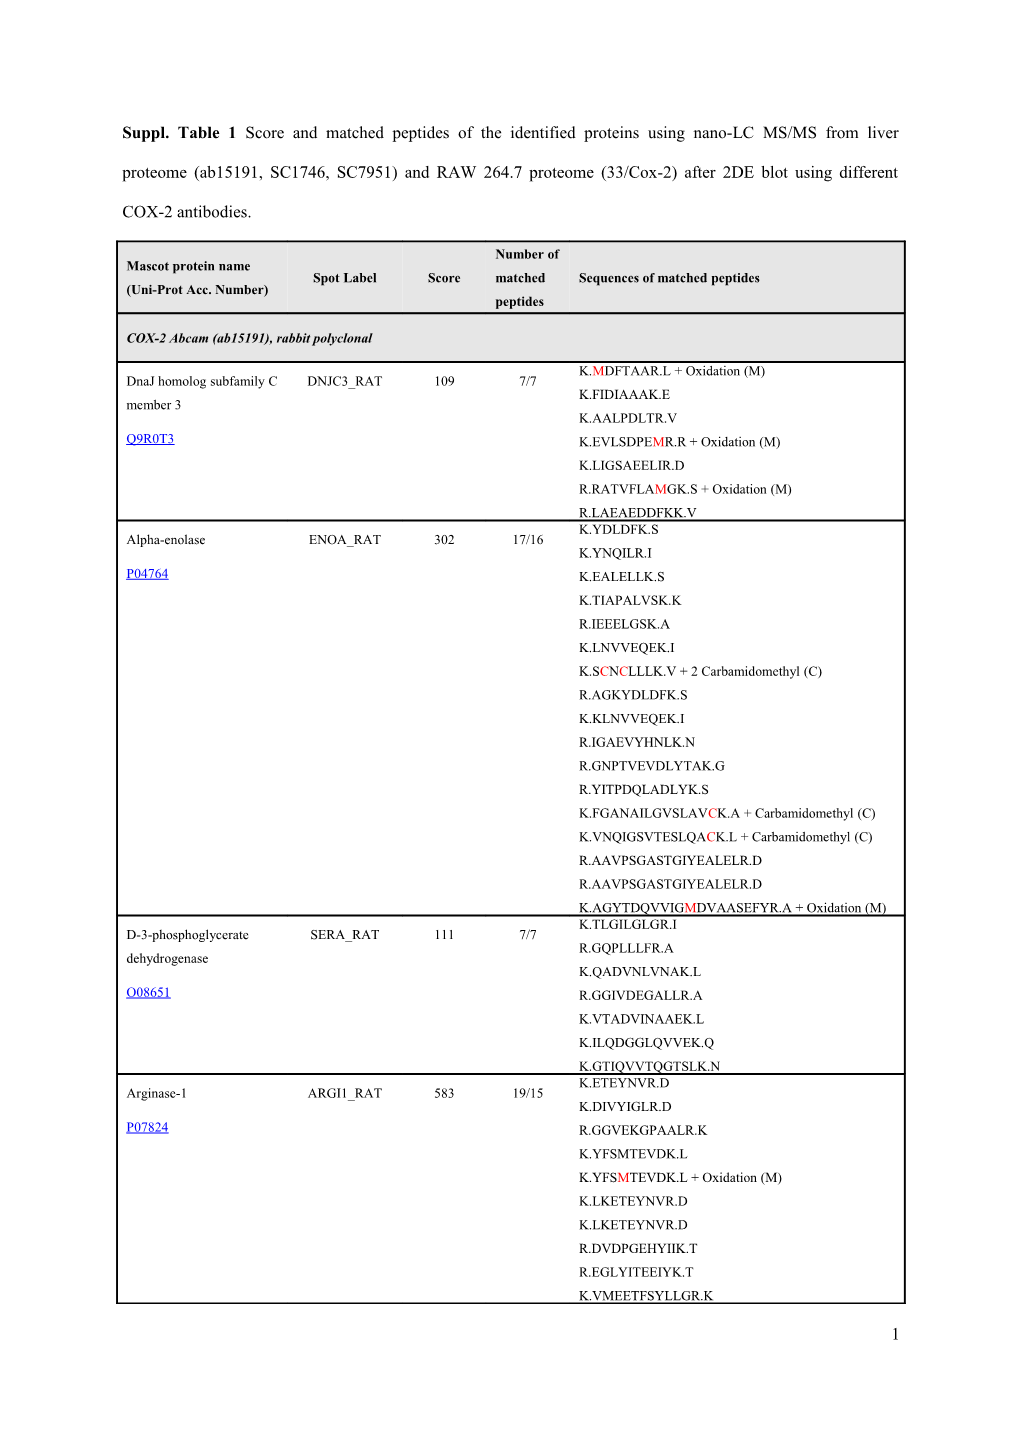 Suppl. Table 1 Score and Matched Peptides of the Identified Proteins Using Nano-LC MS/MS